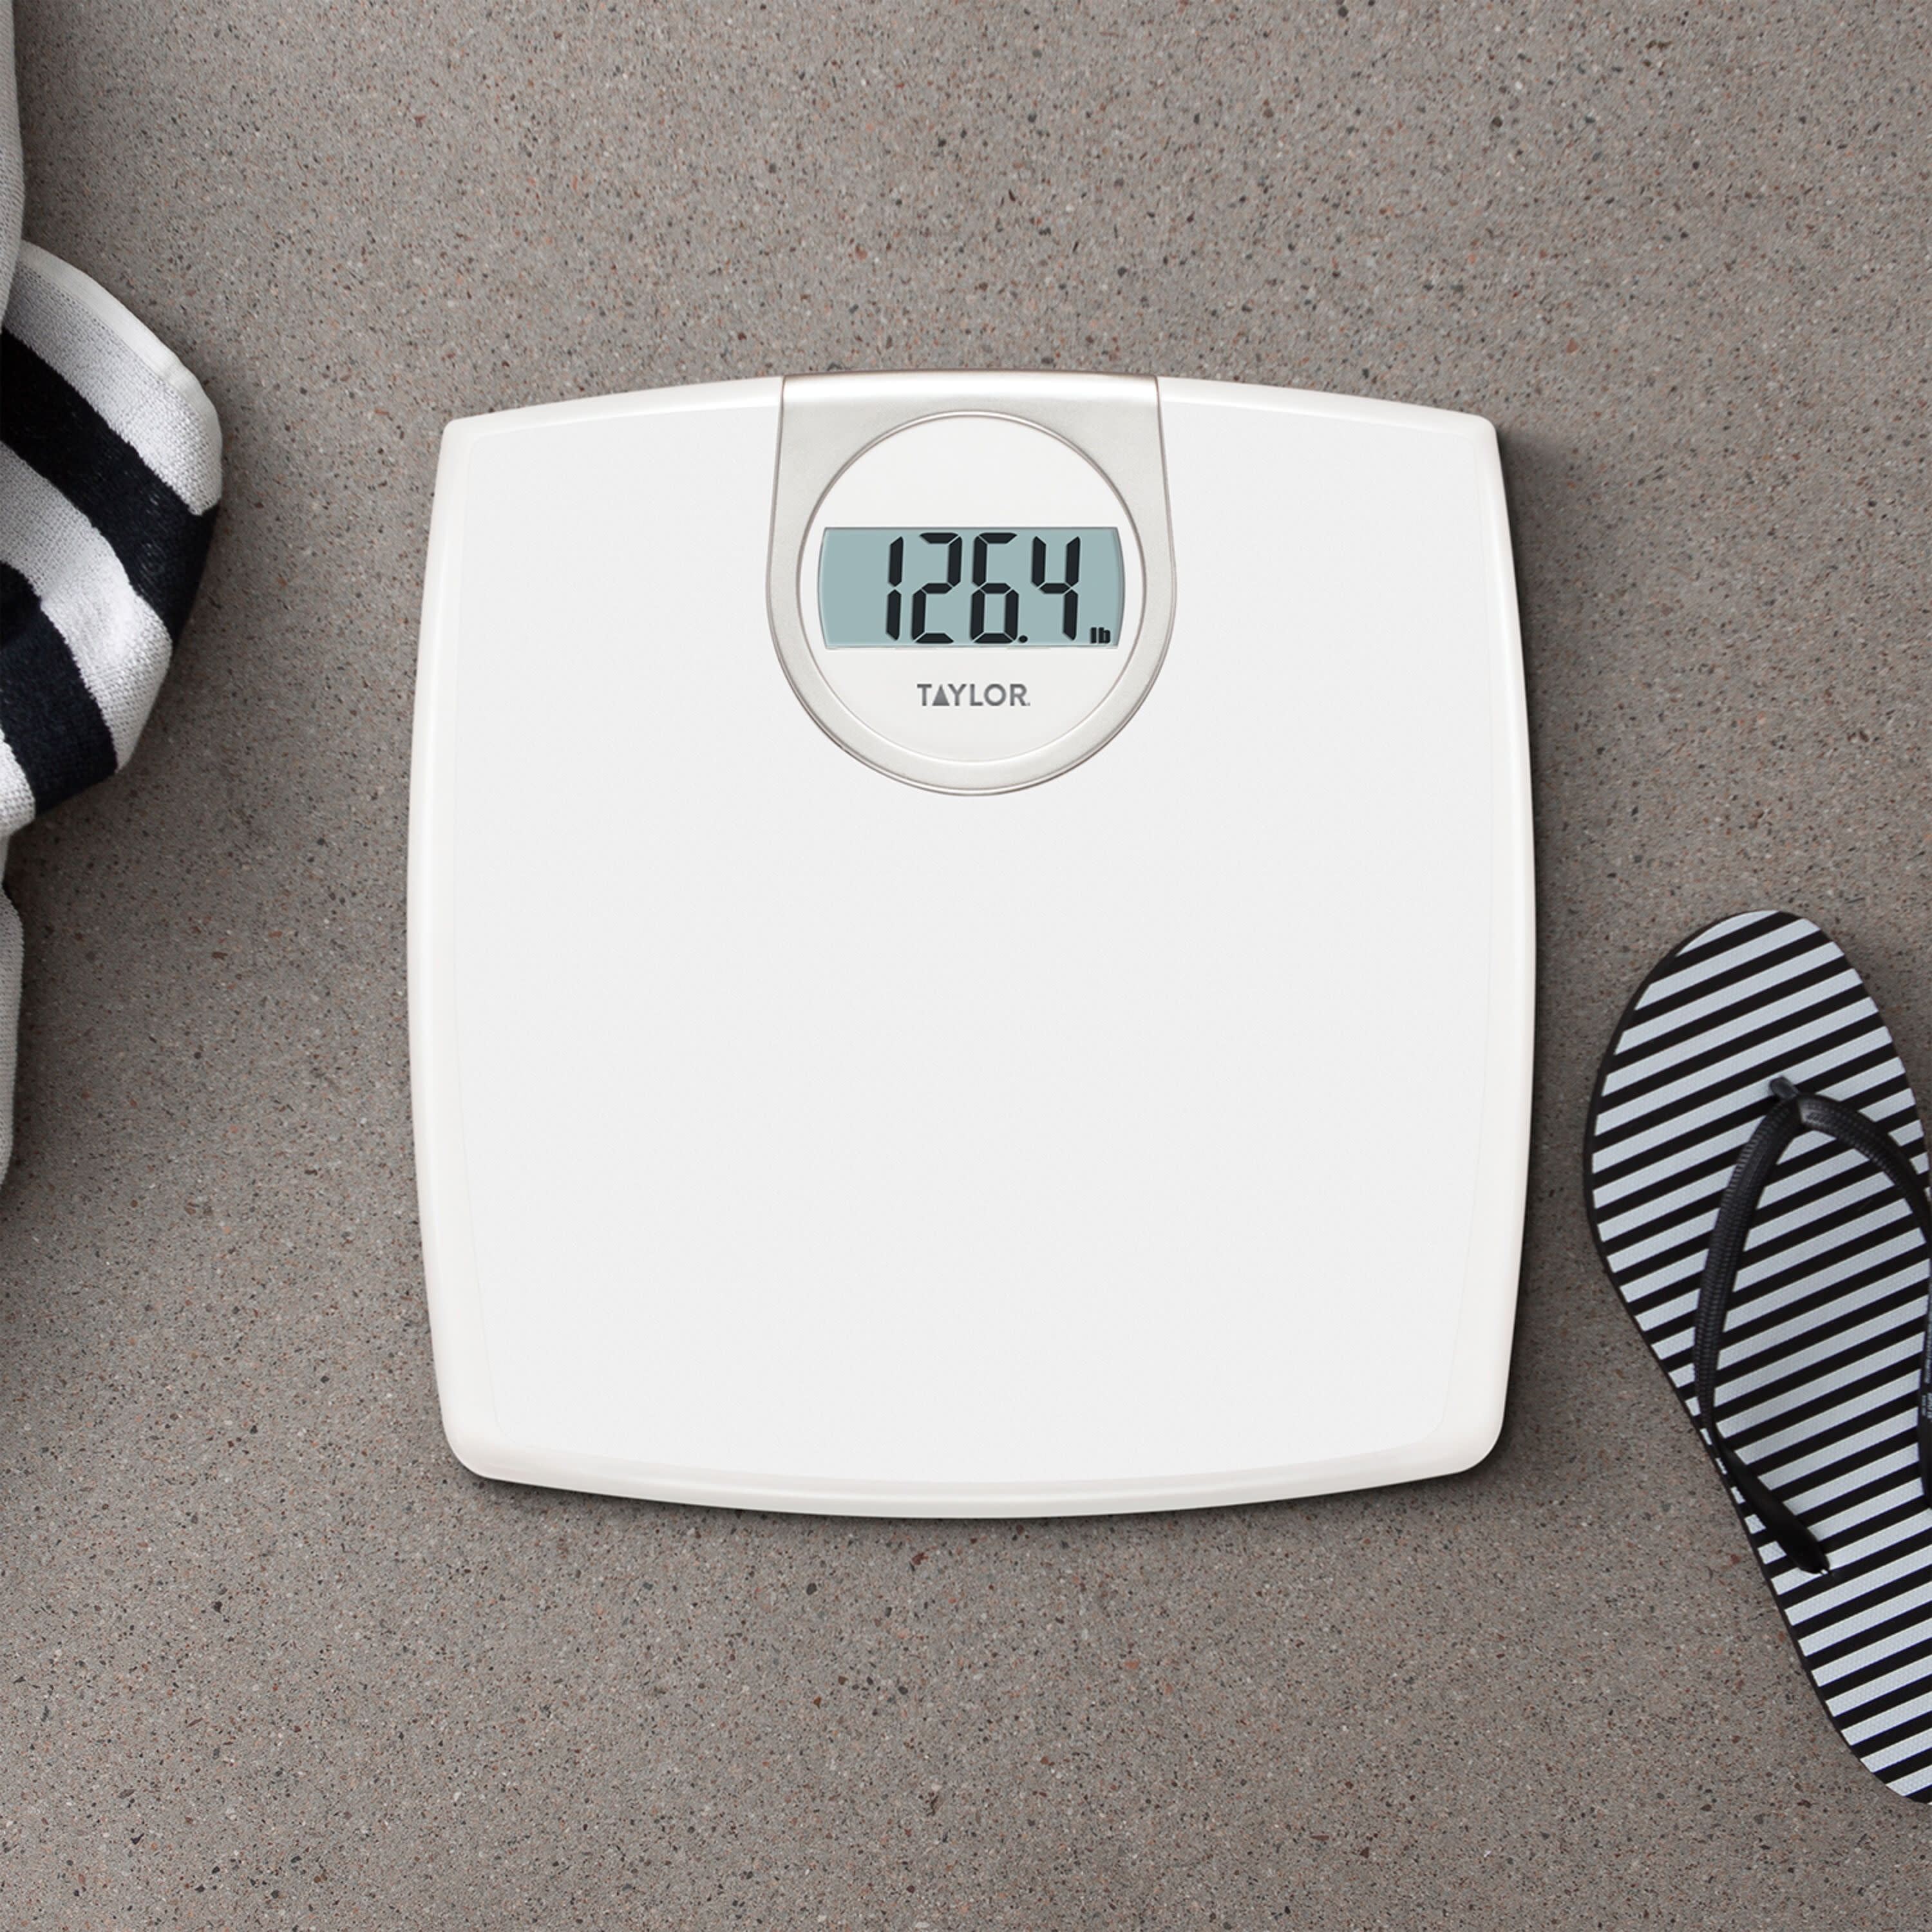 Taylor Pure White Digital Bathroom Scale 752840133 – Good's Store Online